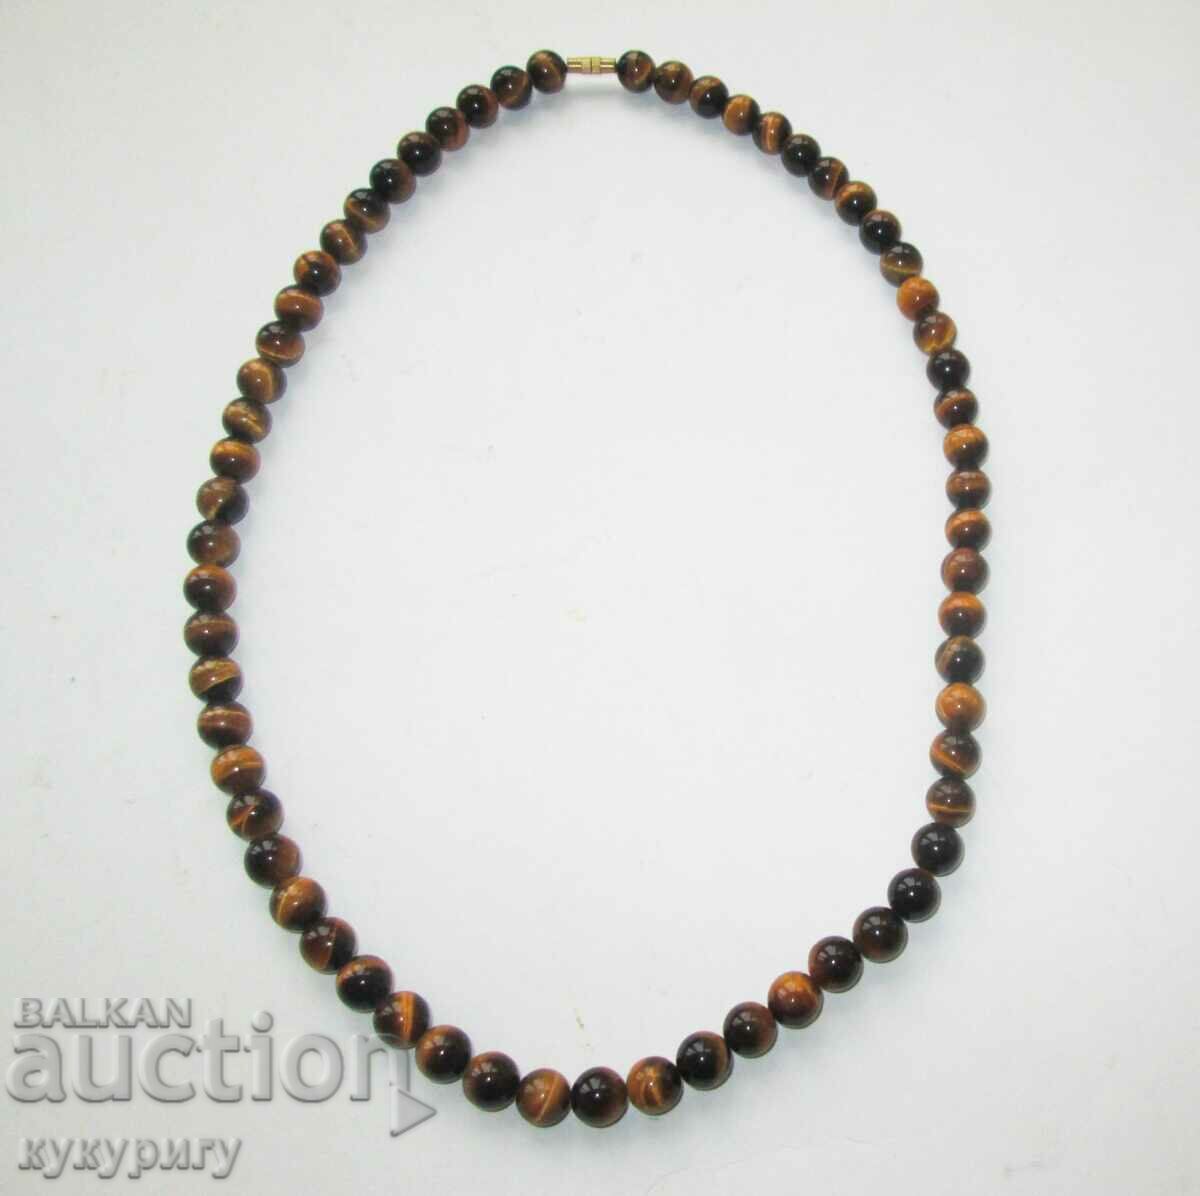 Women's necklace necklace choker made of natural Tiger's eye